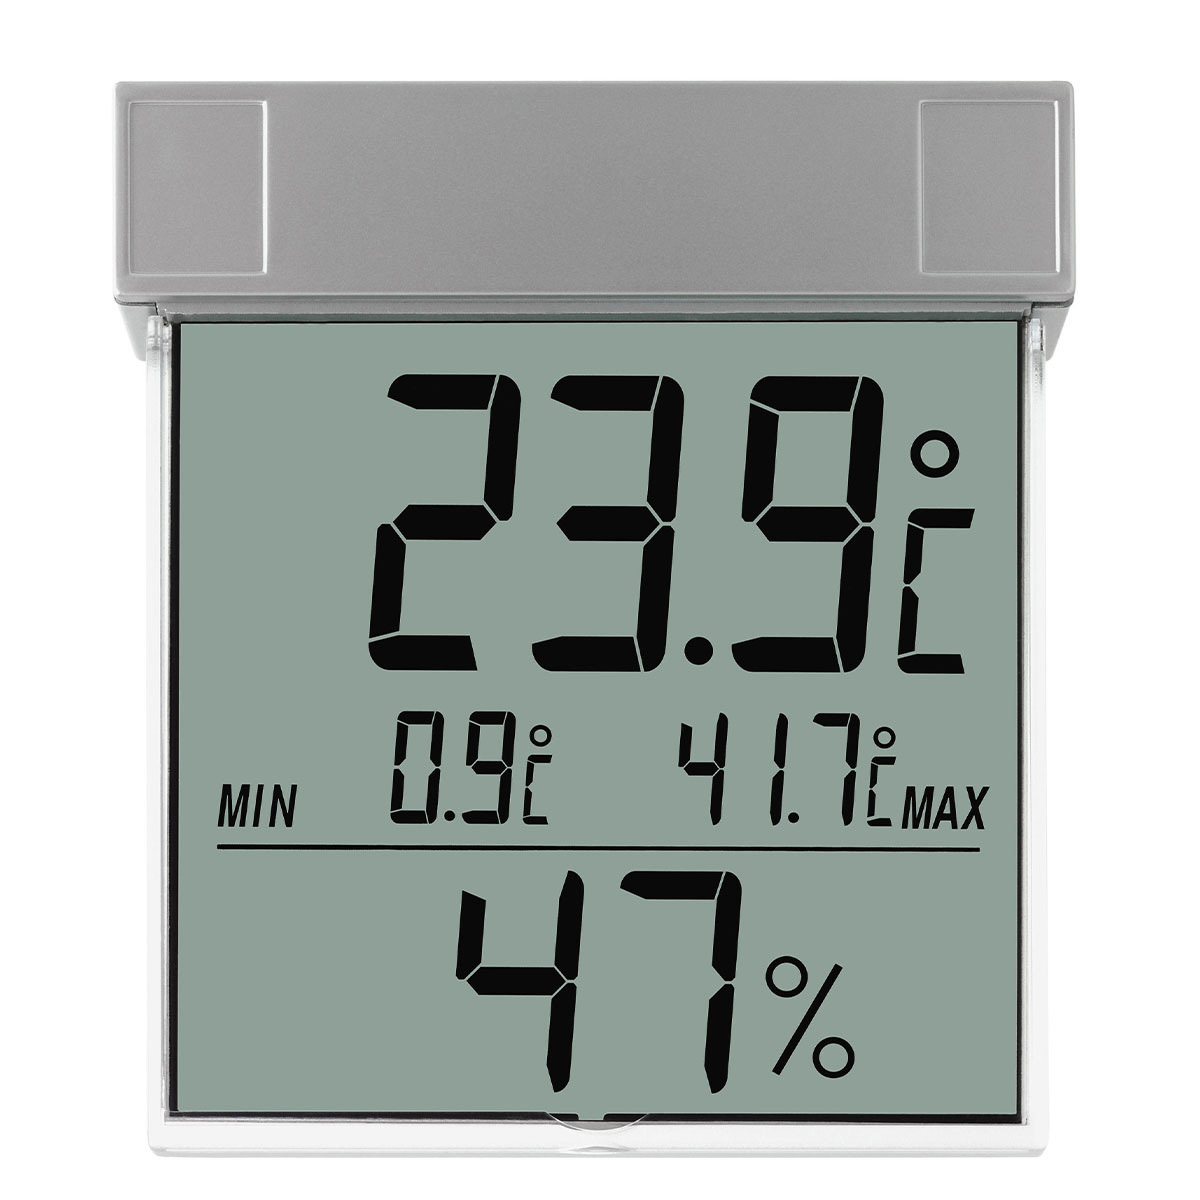 Digital Window Thermometer (2 Color Options)